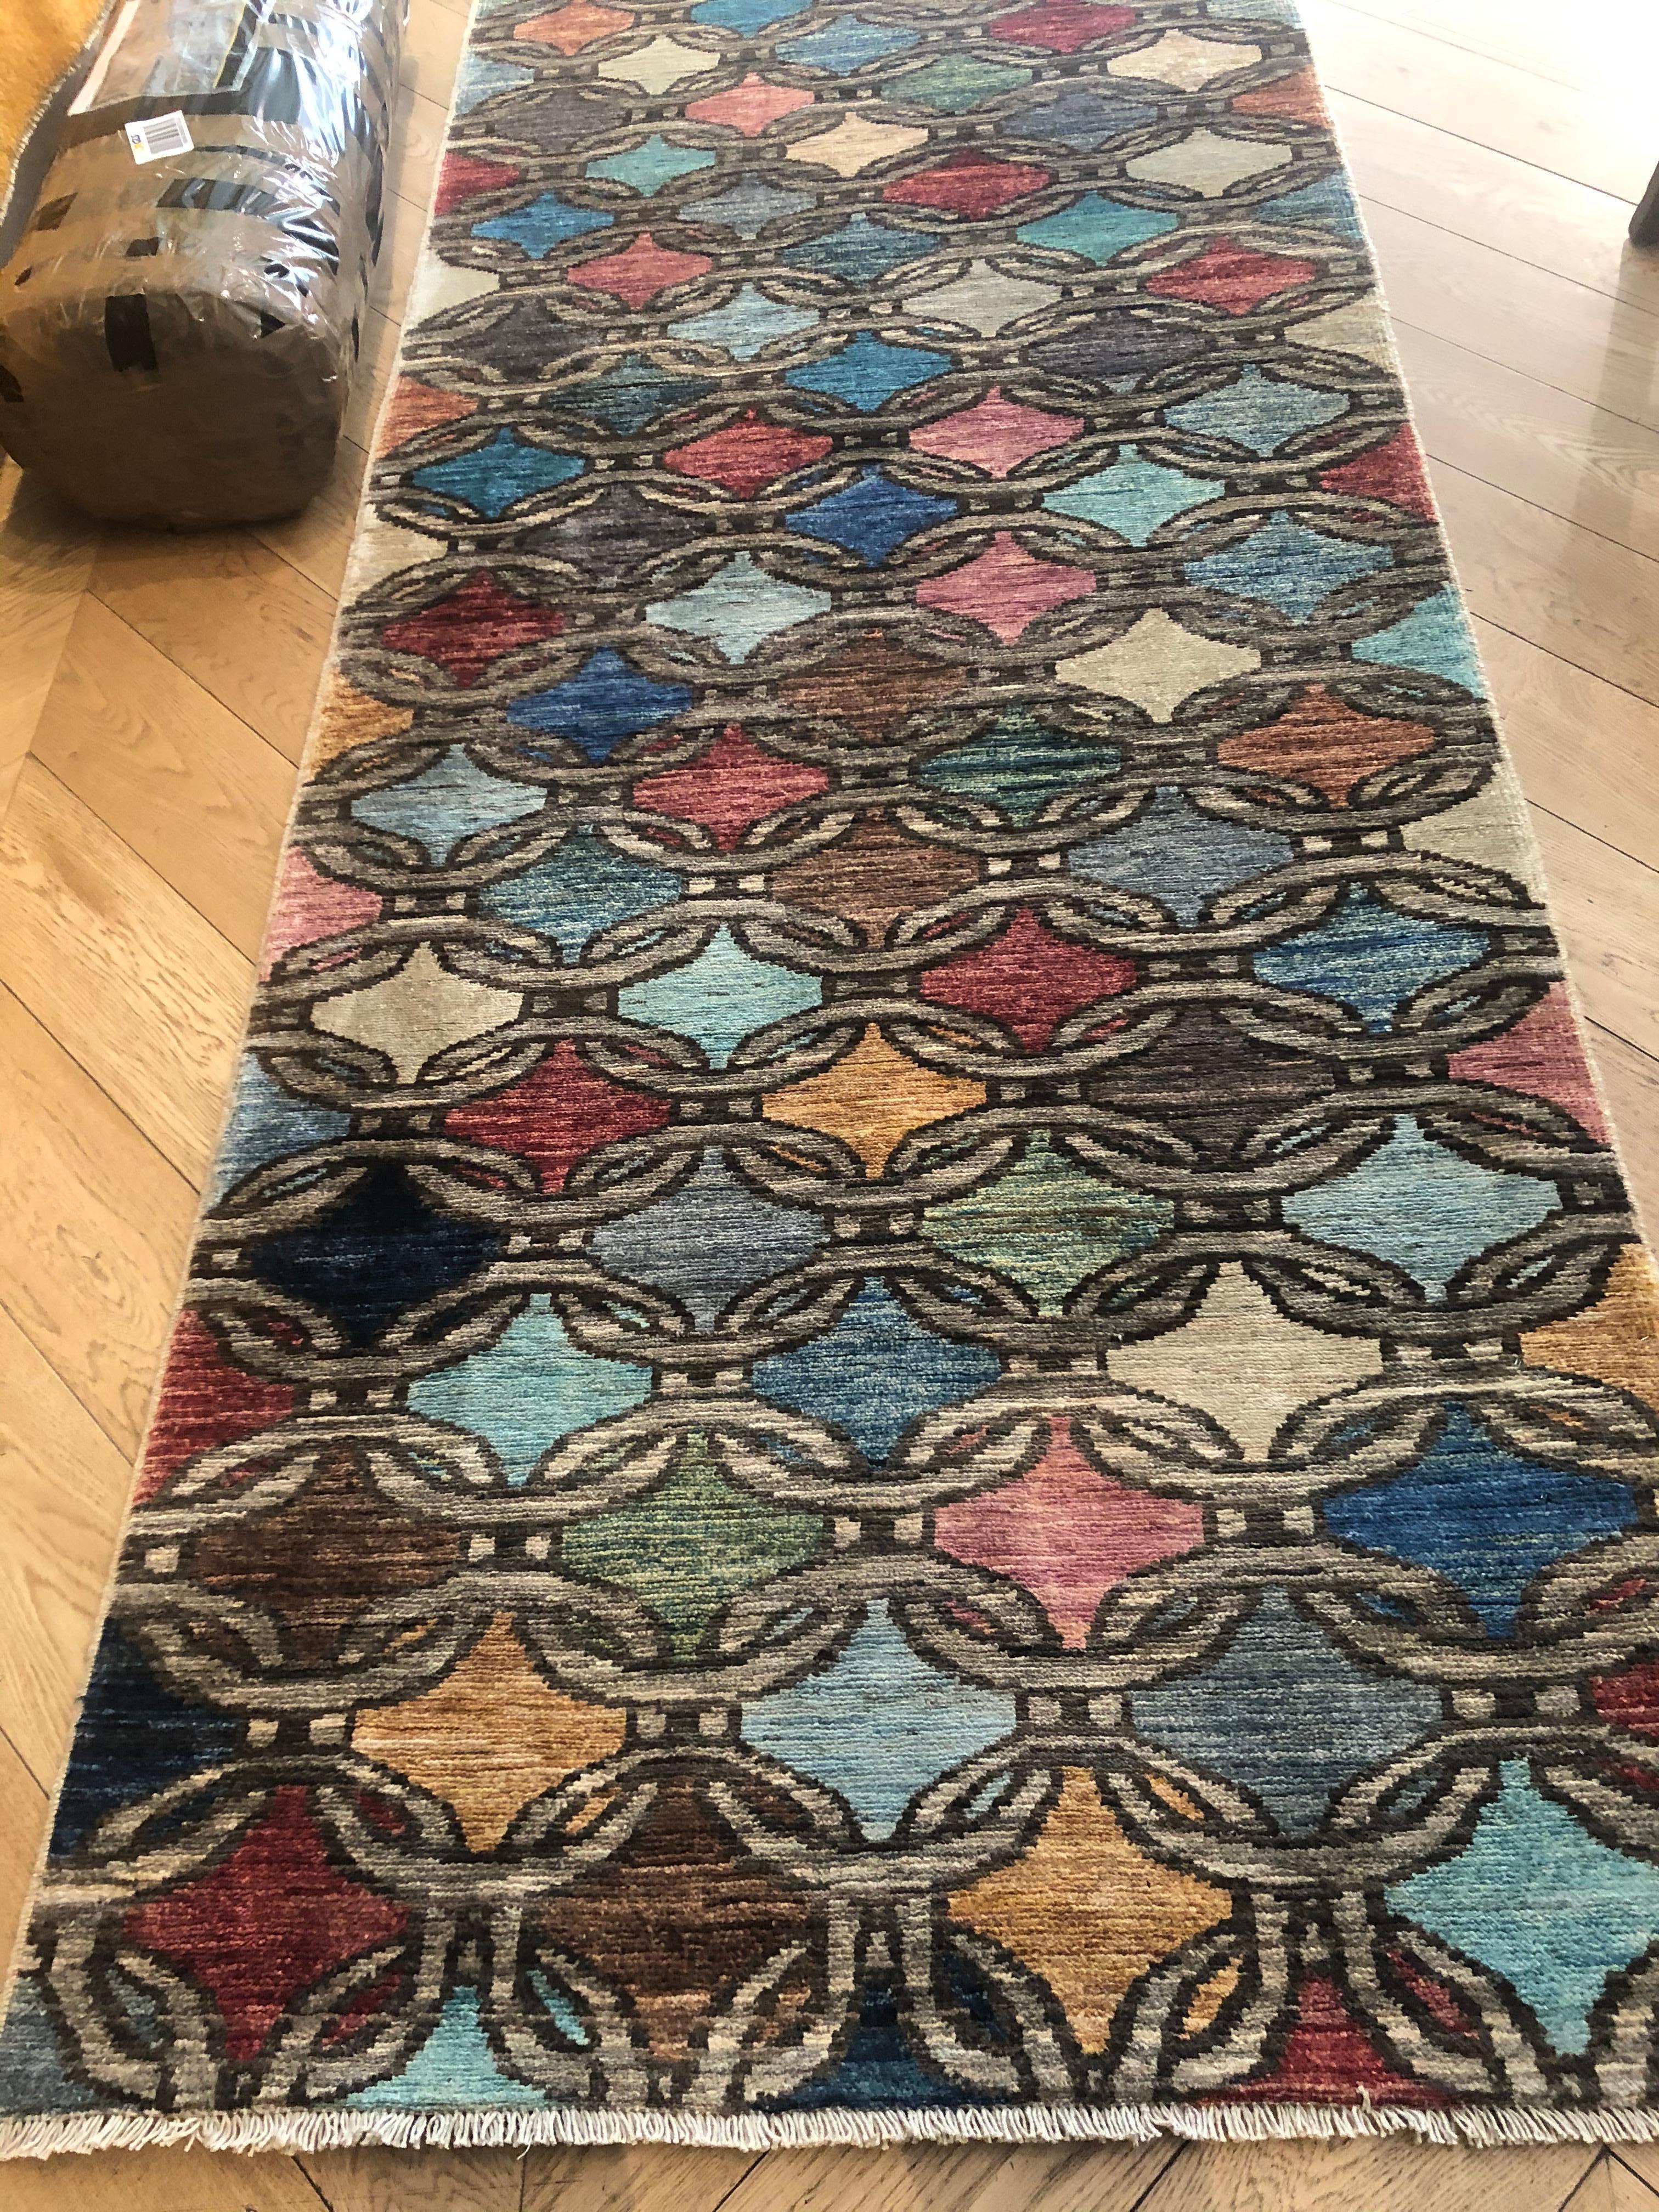 Very particular drawing of this carpet comes from Afghanistan. The country has a long tradition of rug tunes. With a view to re-evaluating the artisan work of these populations and to safeguard the memory, it was thought to introduce new decorative